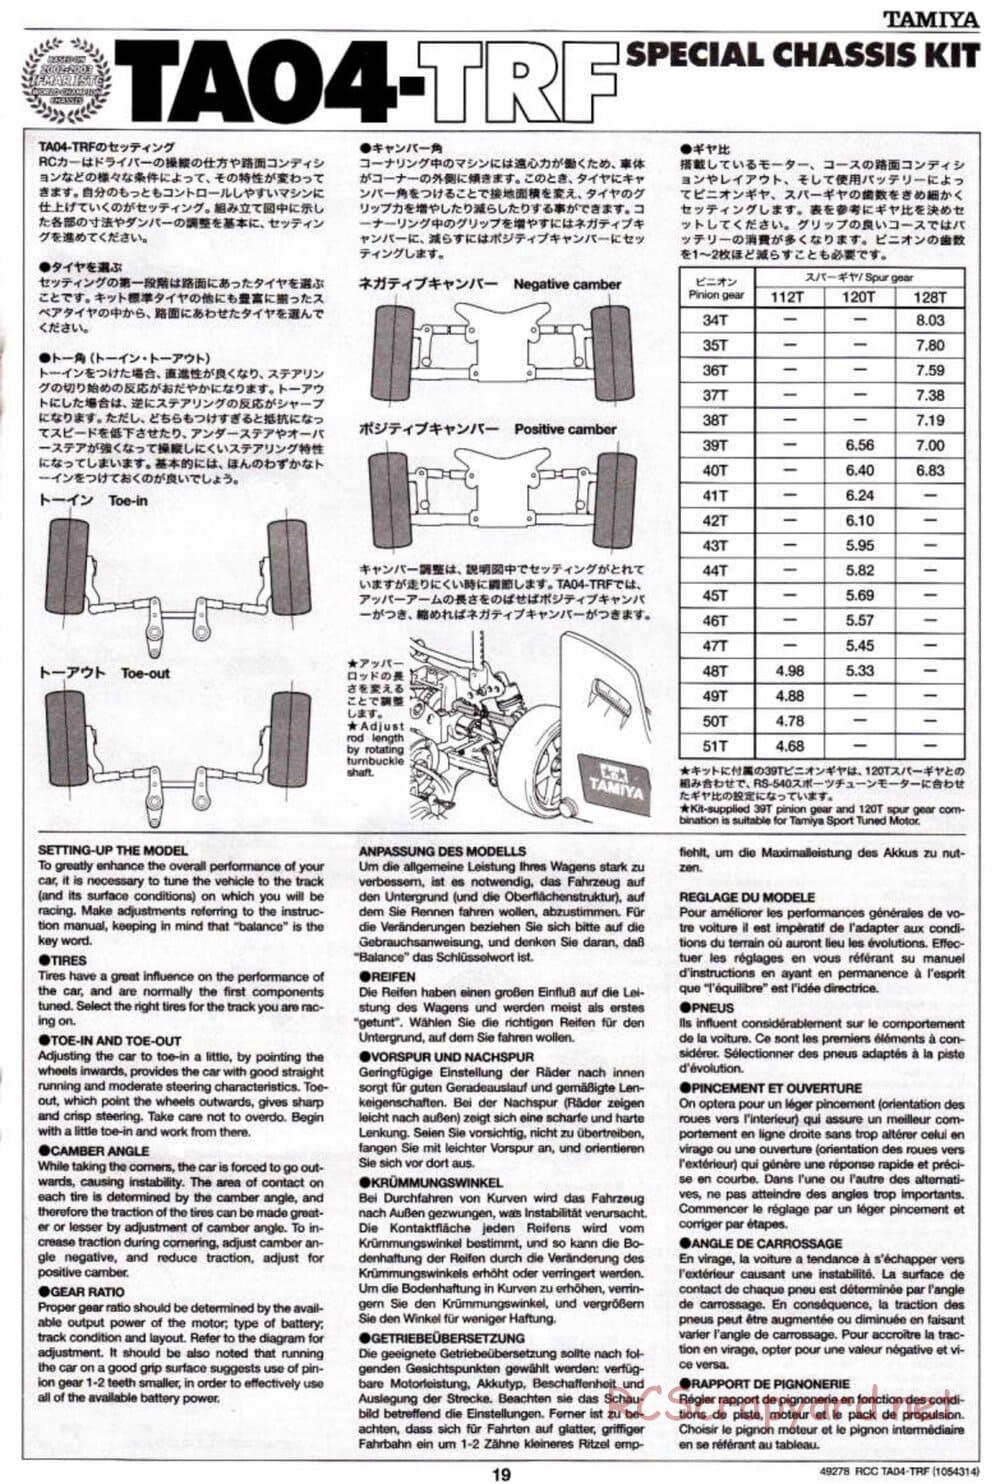 Tamiya - TA-04 TRF Special Chassis Chassis - Manual - Page 19